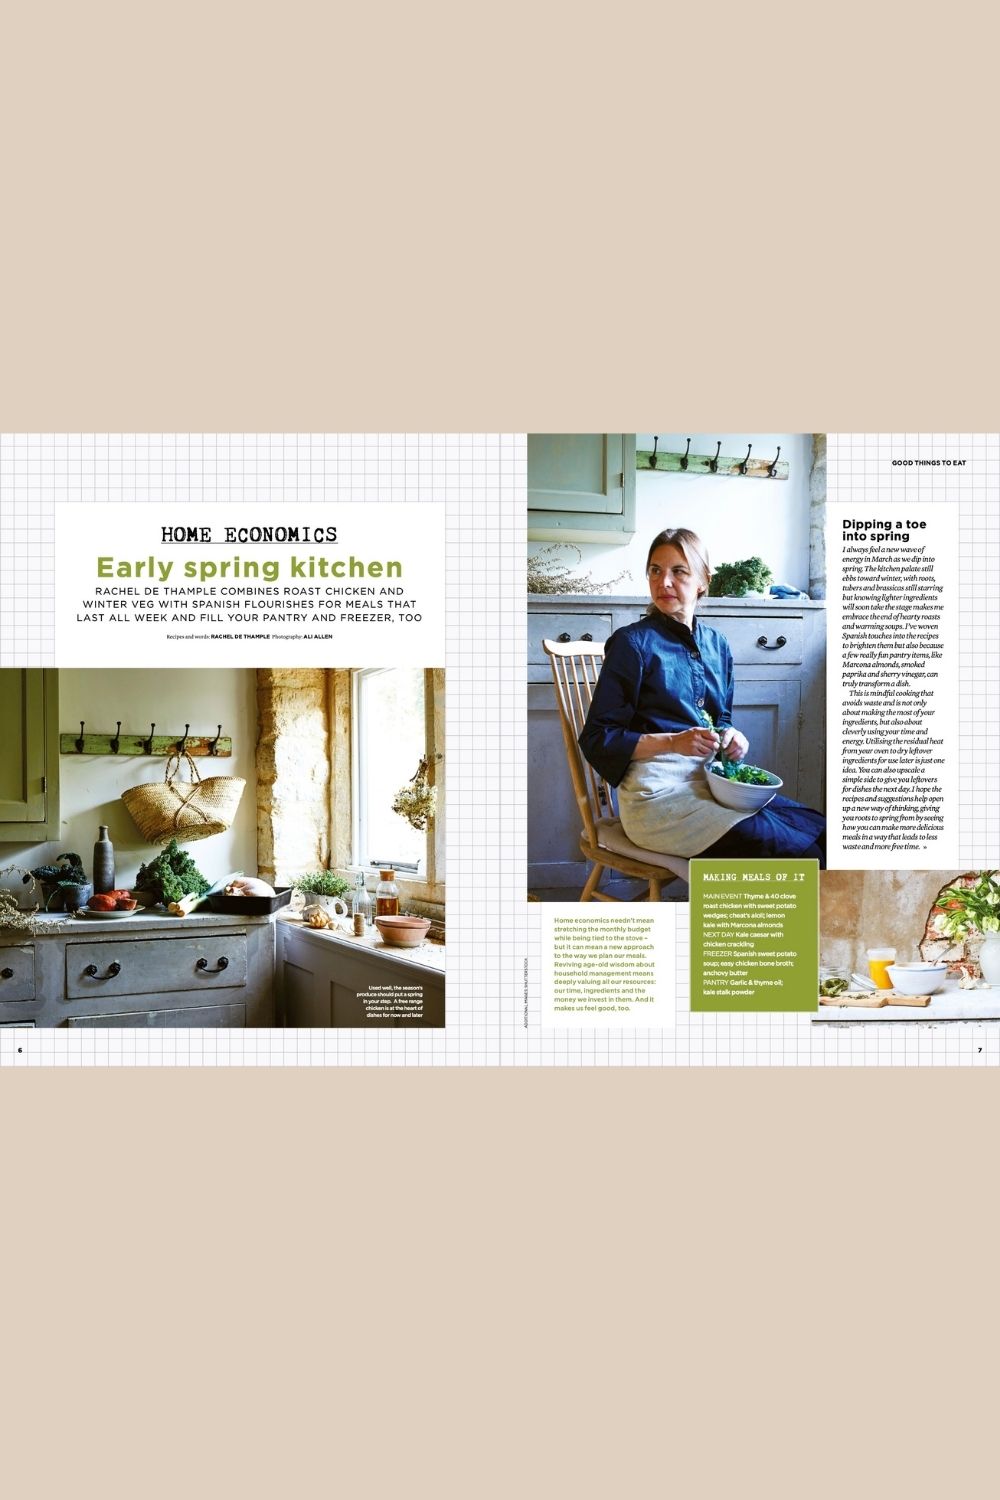 The Simple Things Issue 117 March